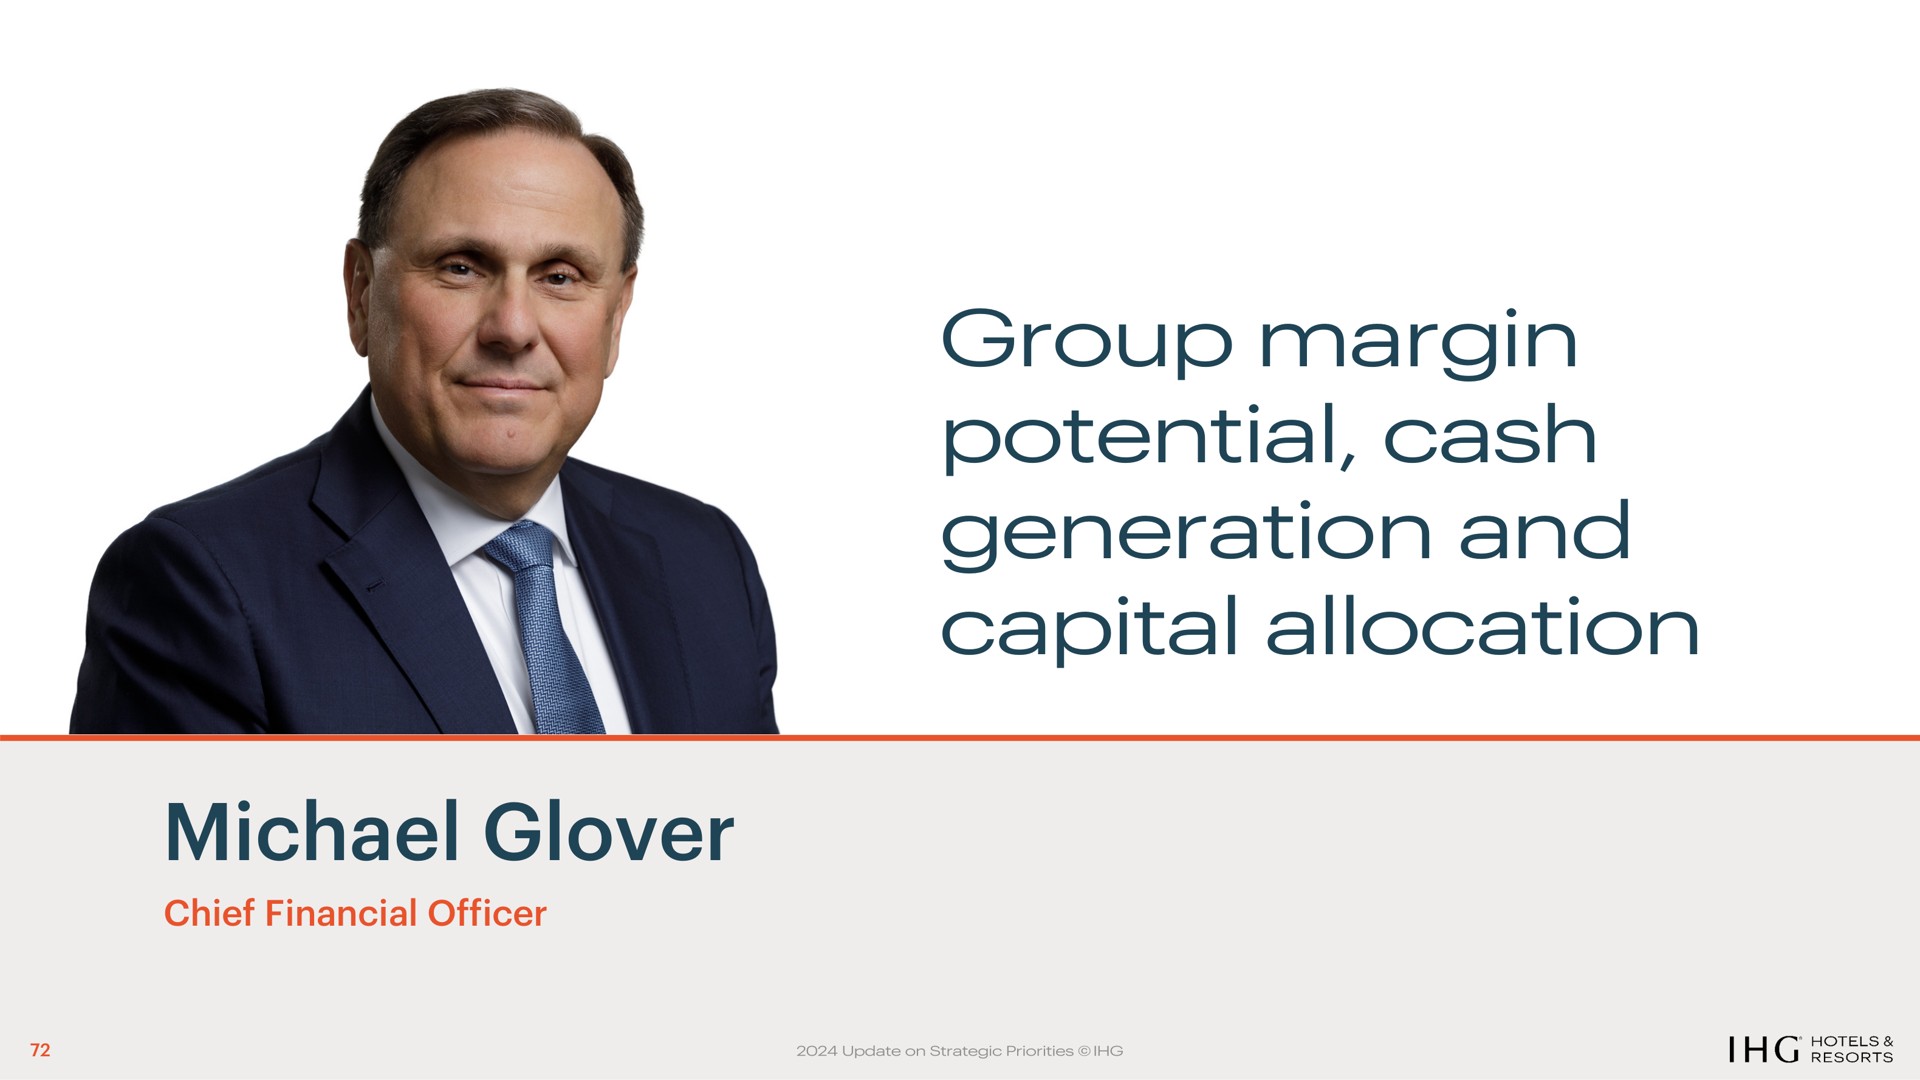 group margin potential cash generation and capital allocation glover | IHG Hotels